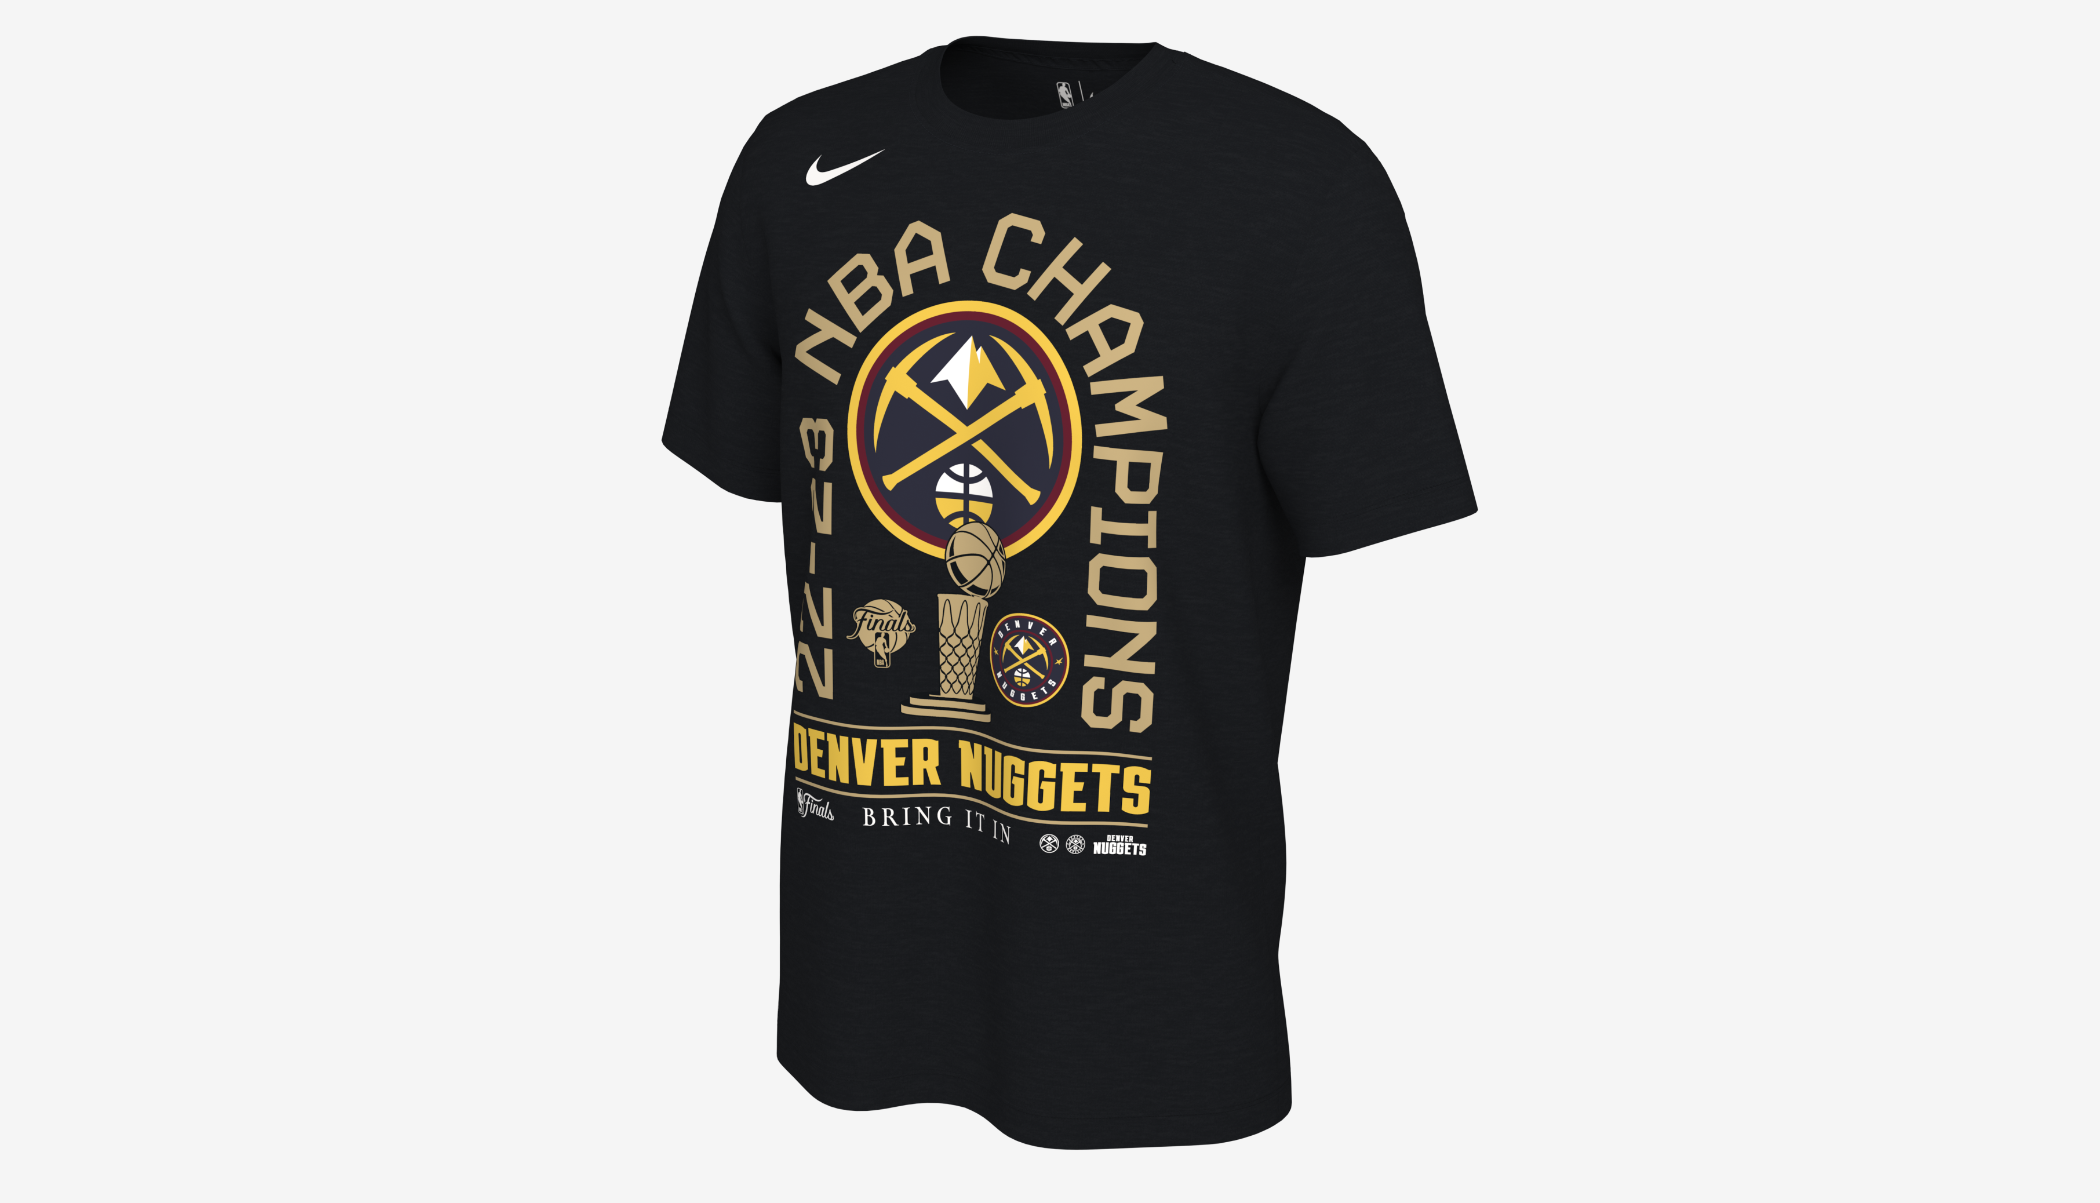 Denver Nuggets NBA Champions gear, get the official…